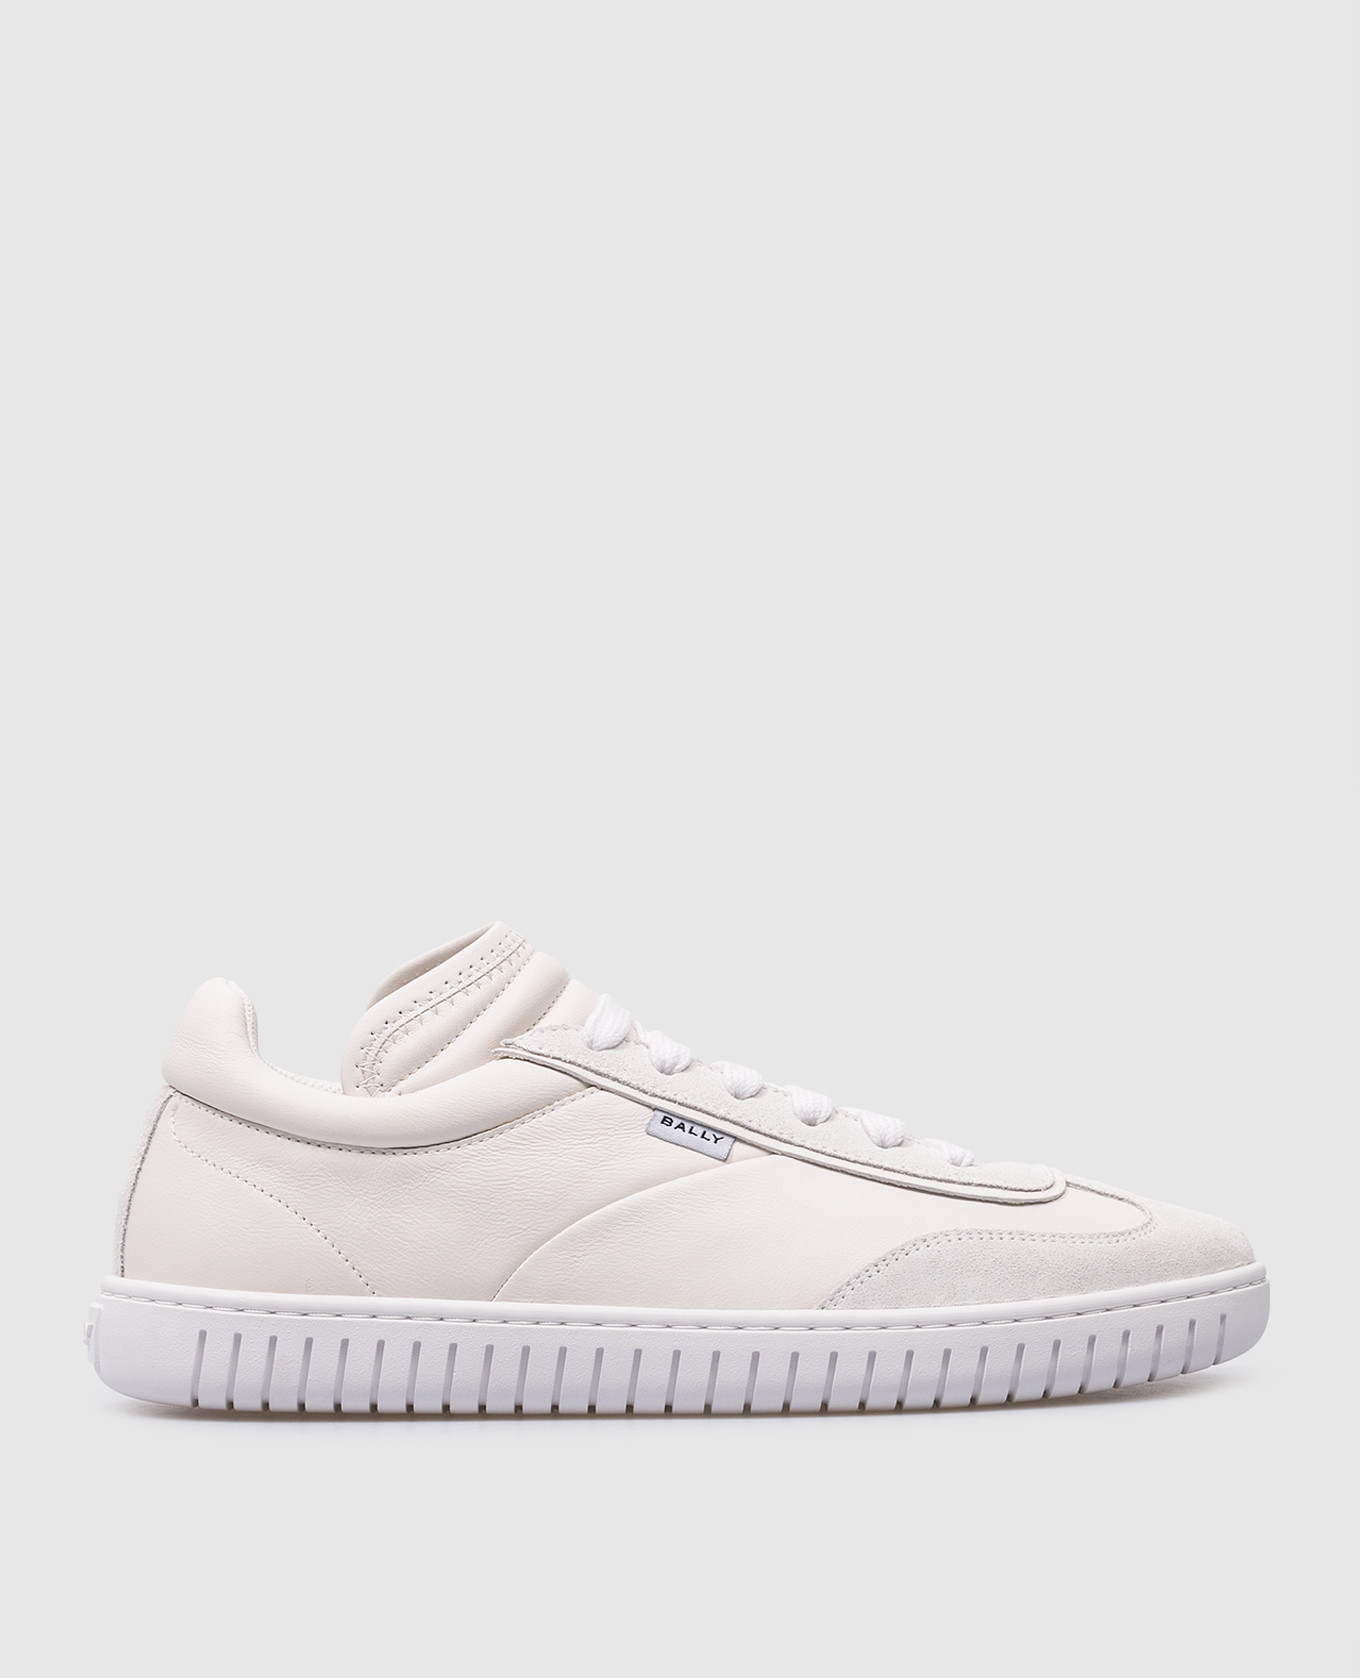 Parrel white leather sneakers